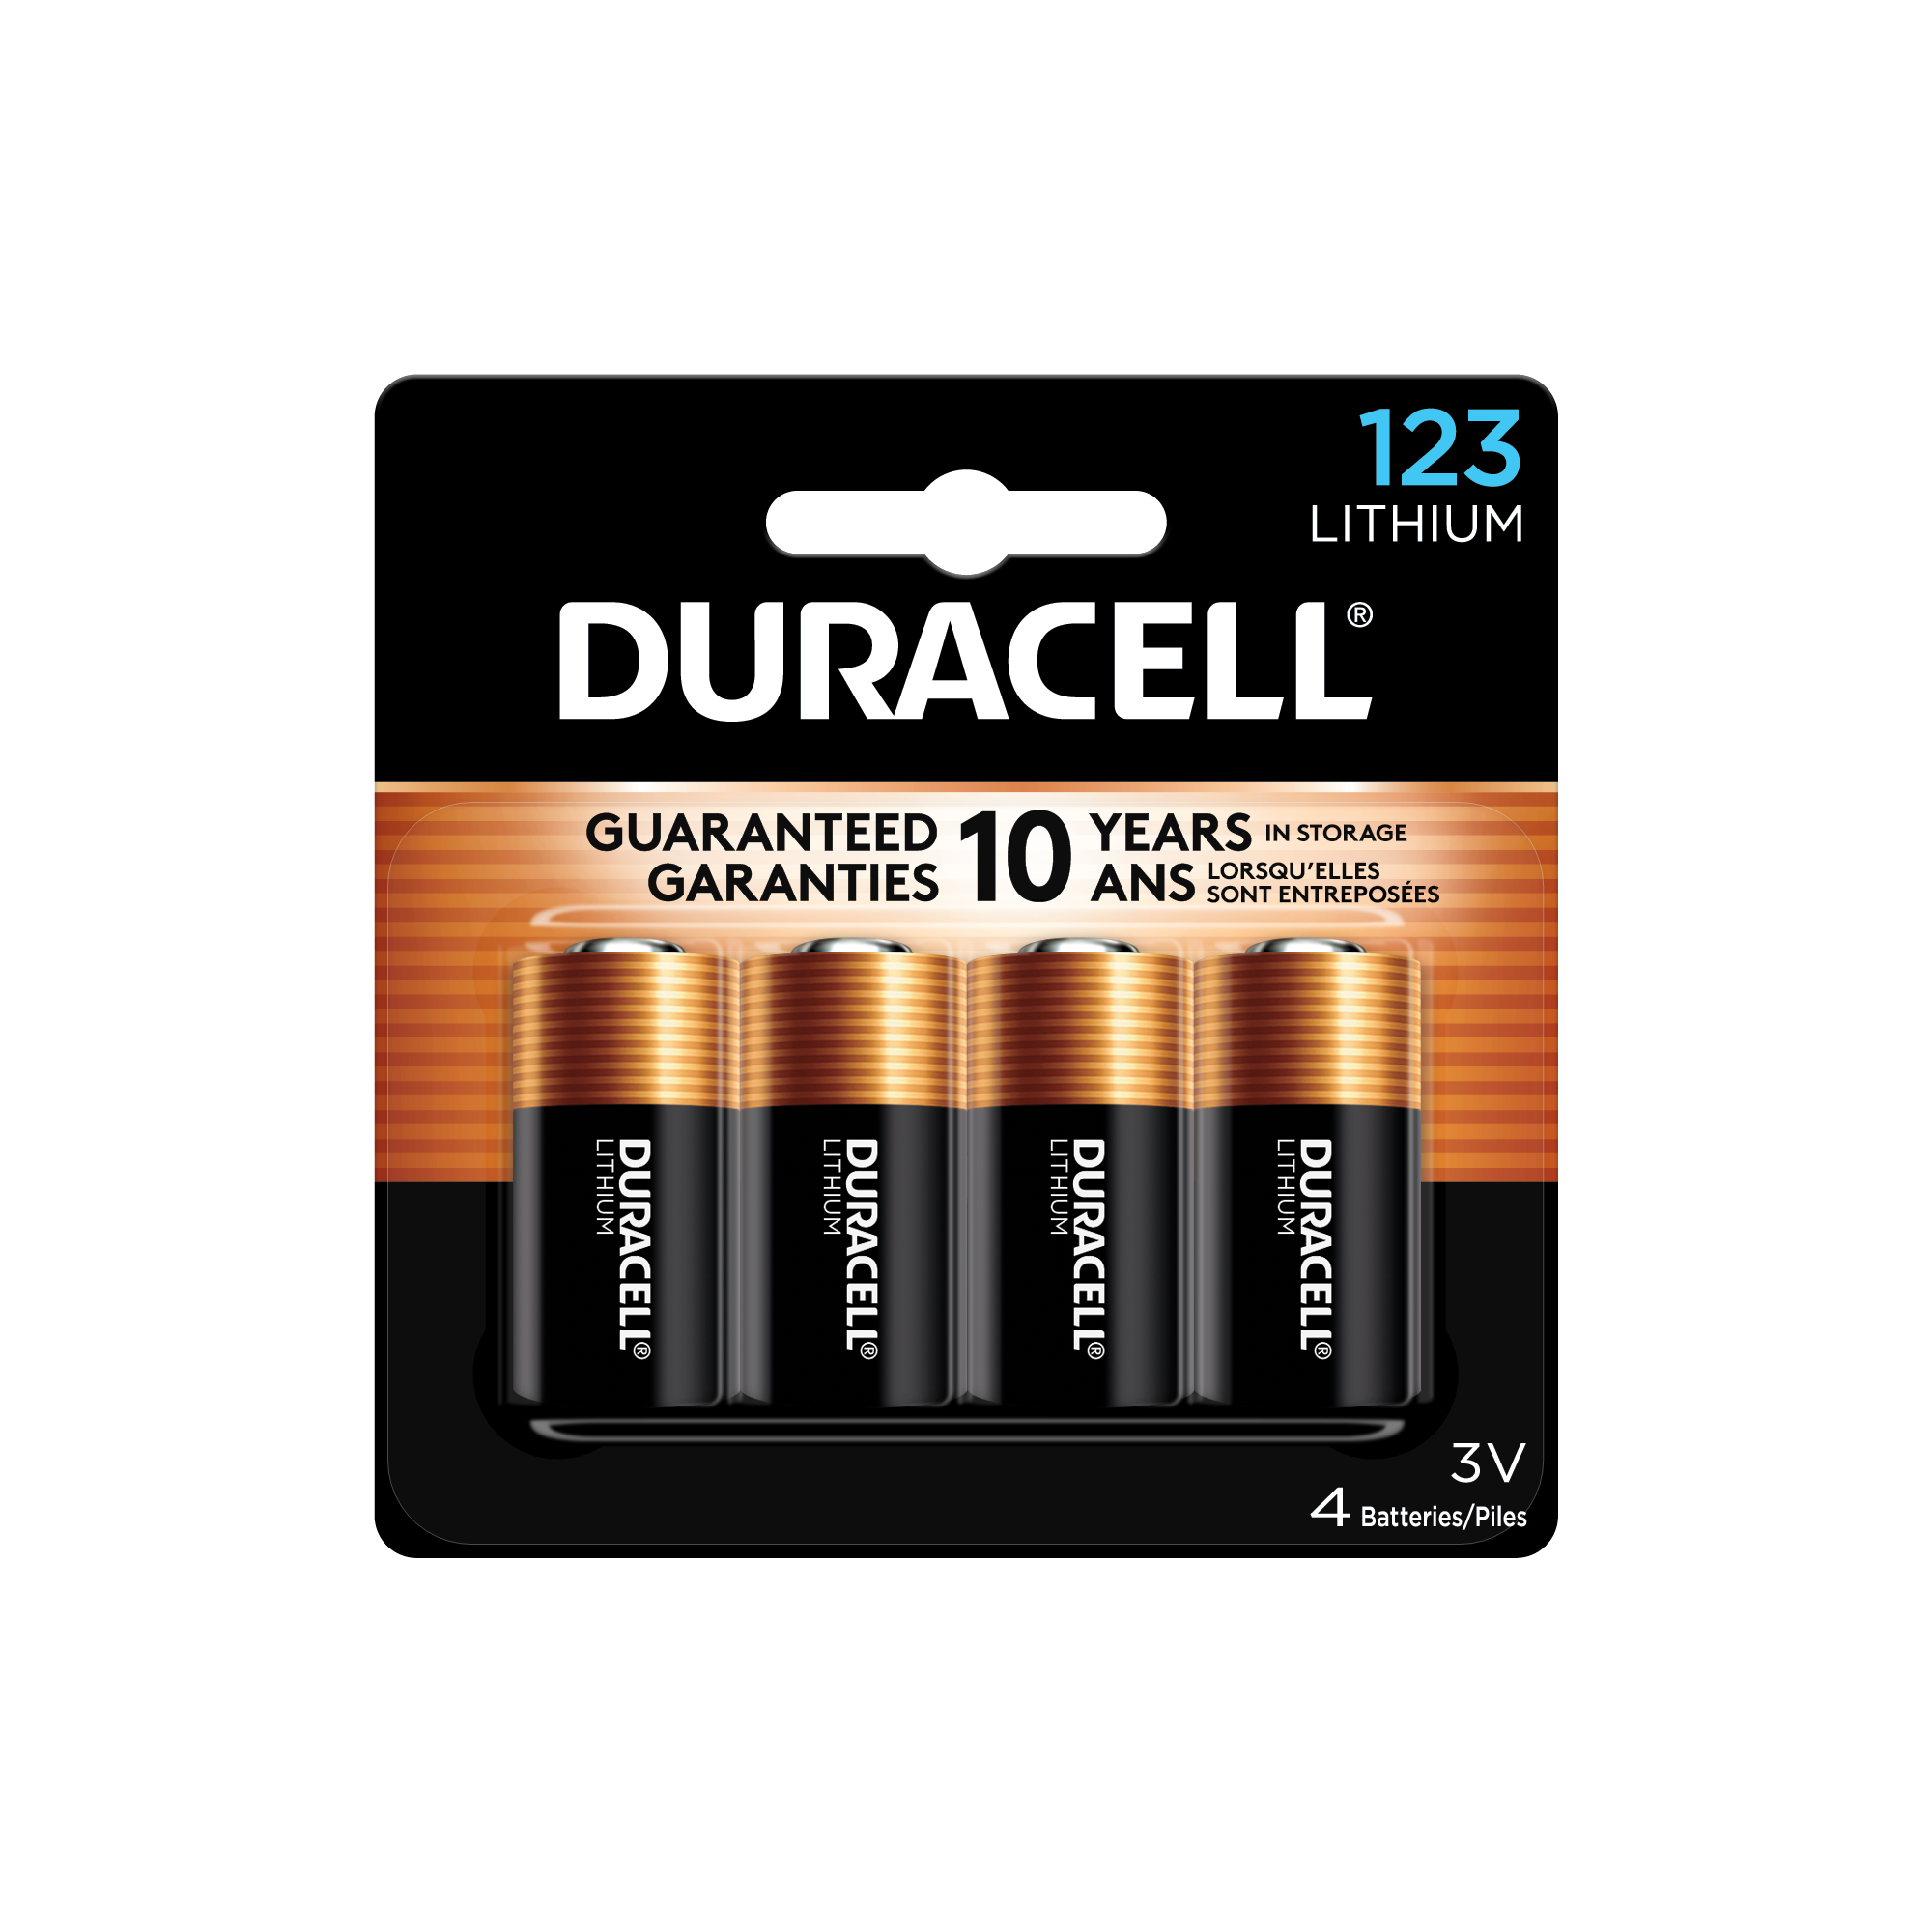 Energizer Lithium EBE-123 Digital Camera Batteries (2-Pack) in the